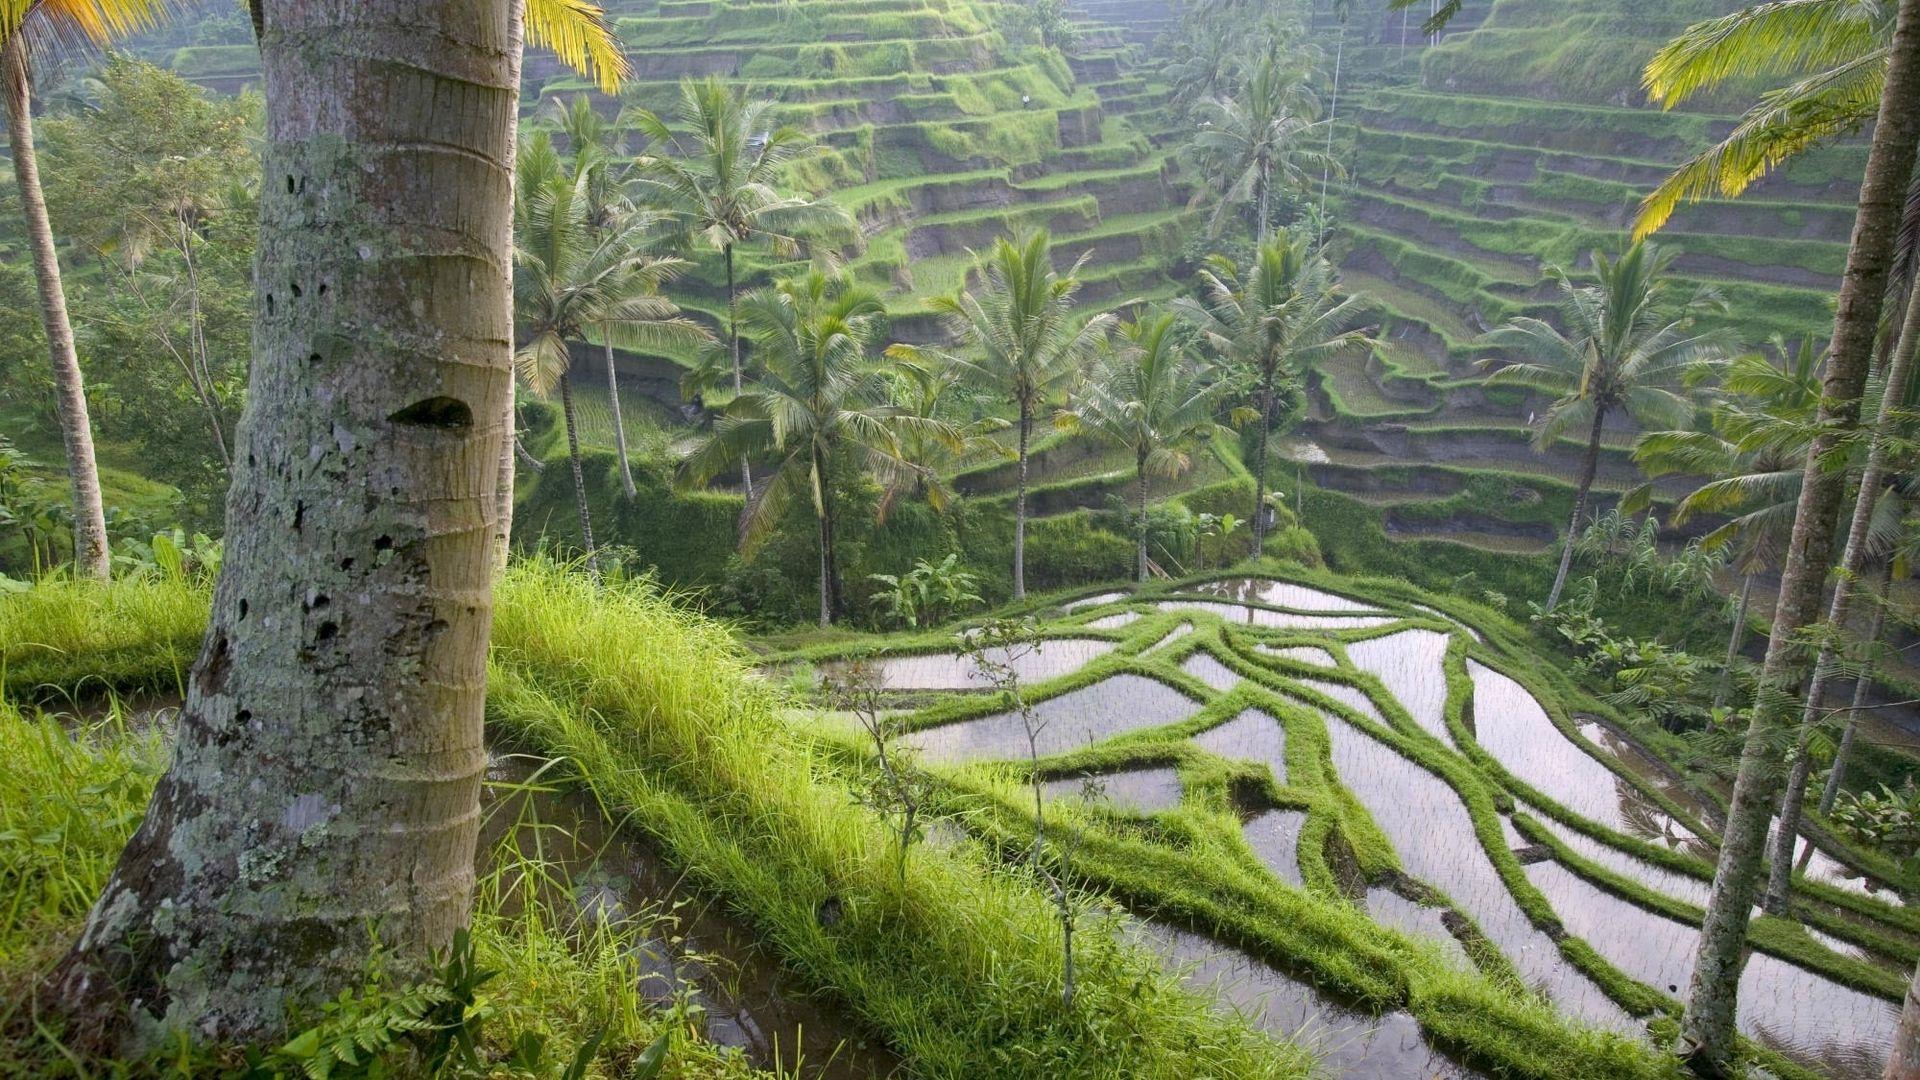 Download wallpaper 1920x1080 asia, rice fields, palm trees, economy